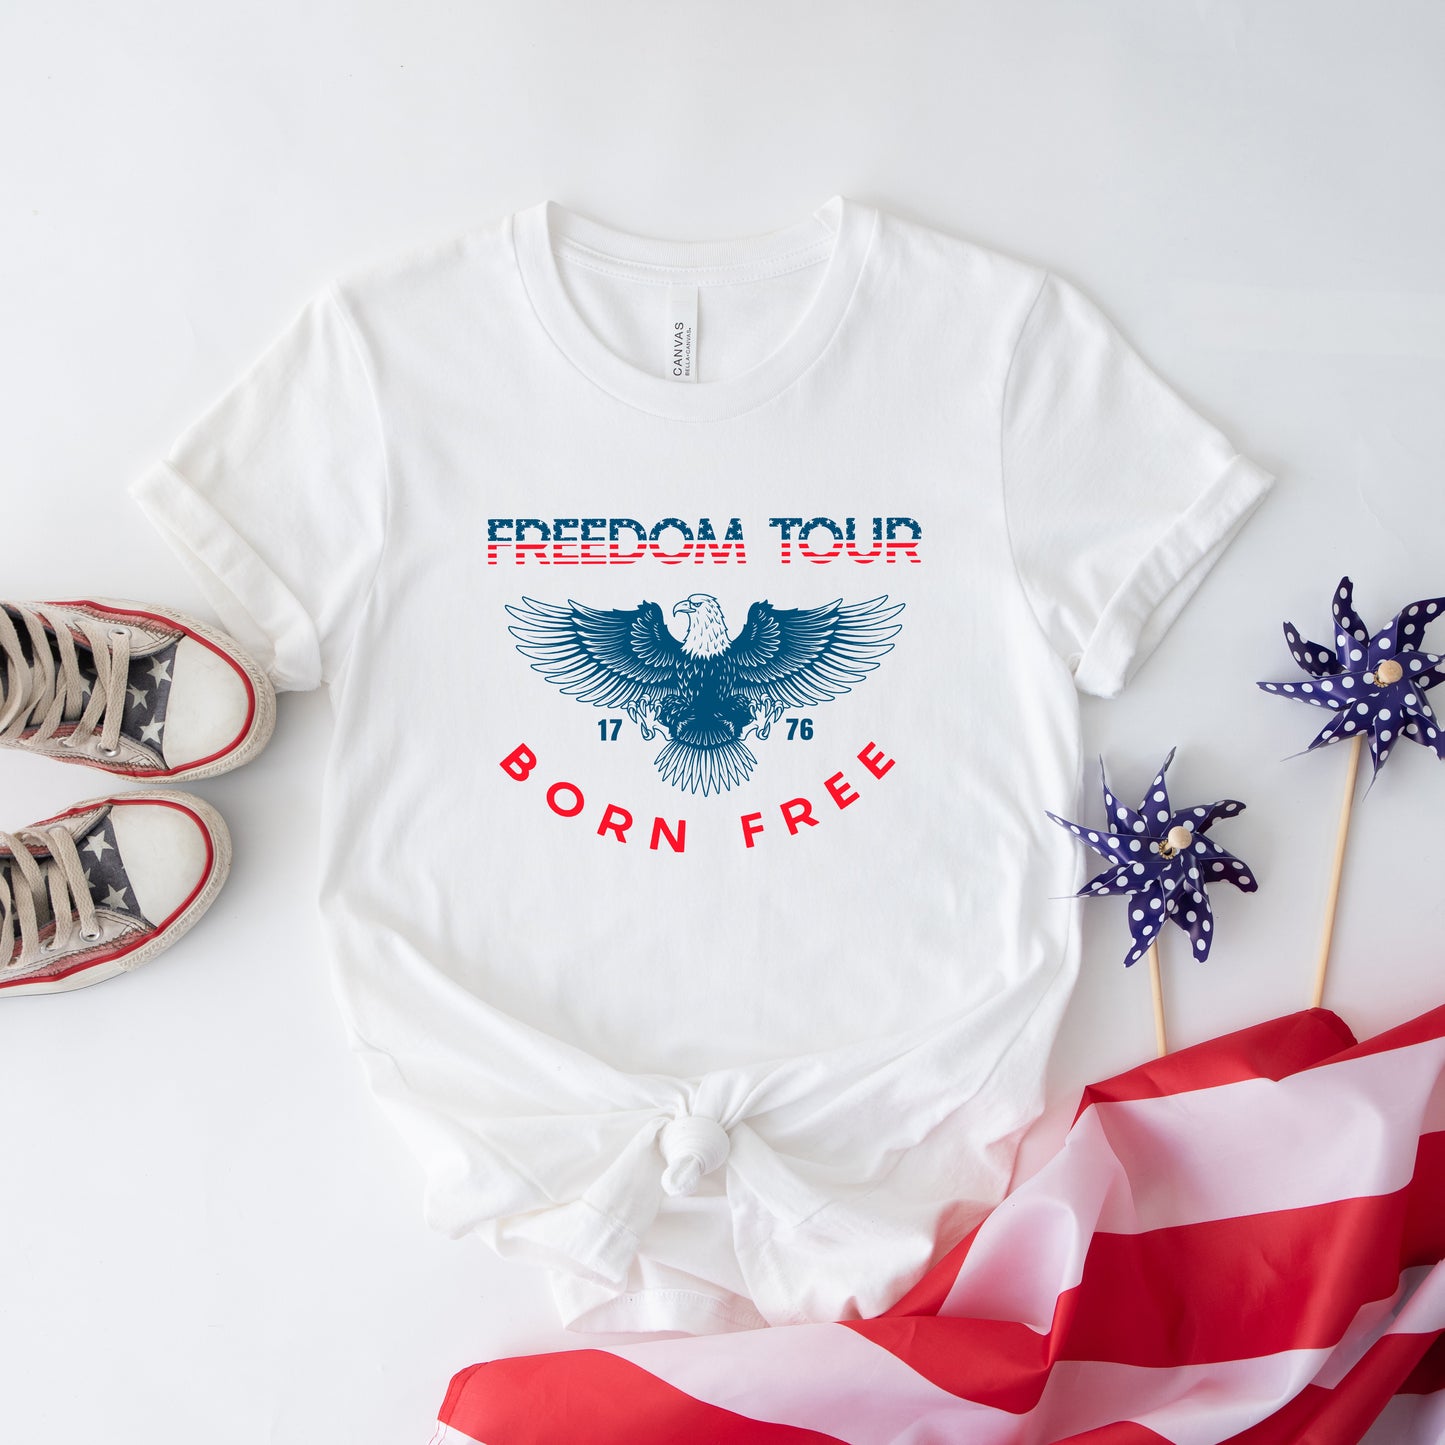 Freedom Tour Eagle | Short Sleeve Graphic Tee